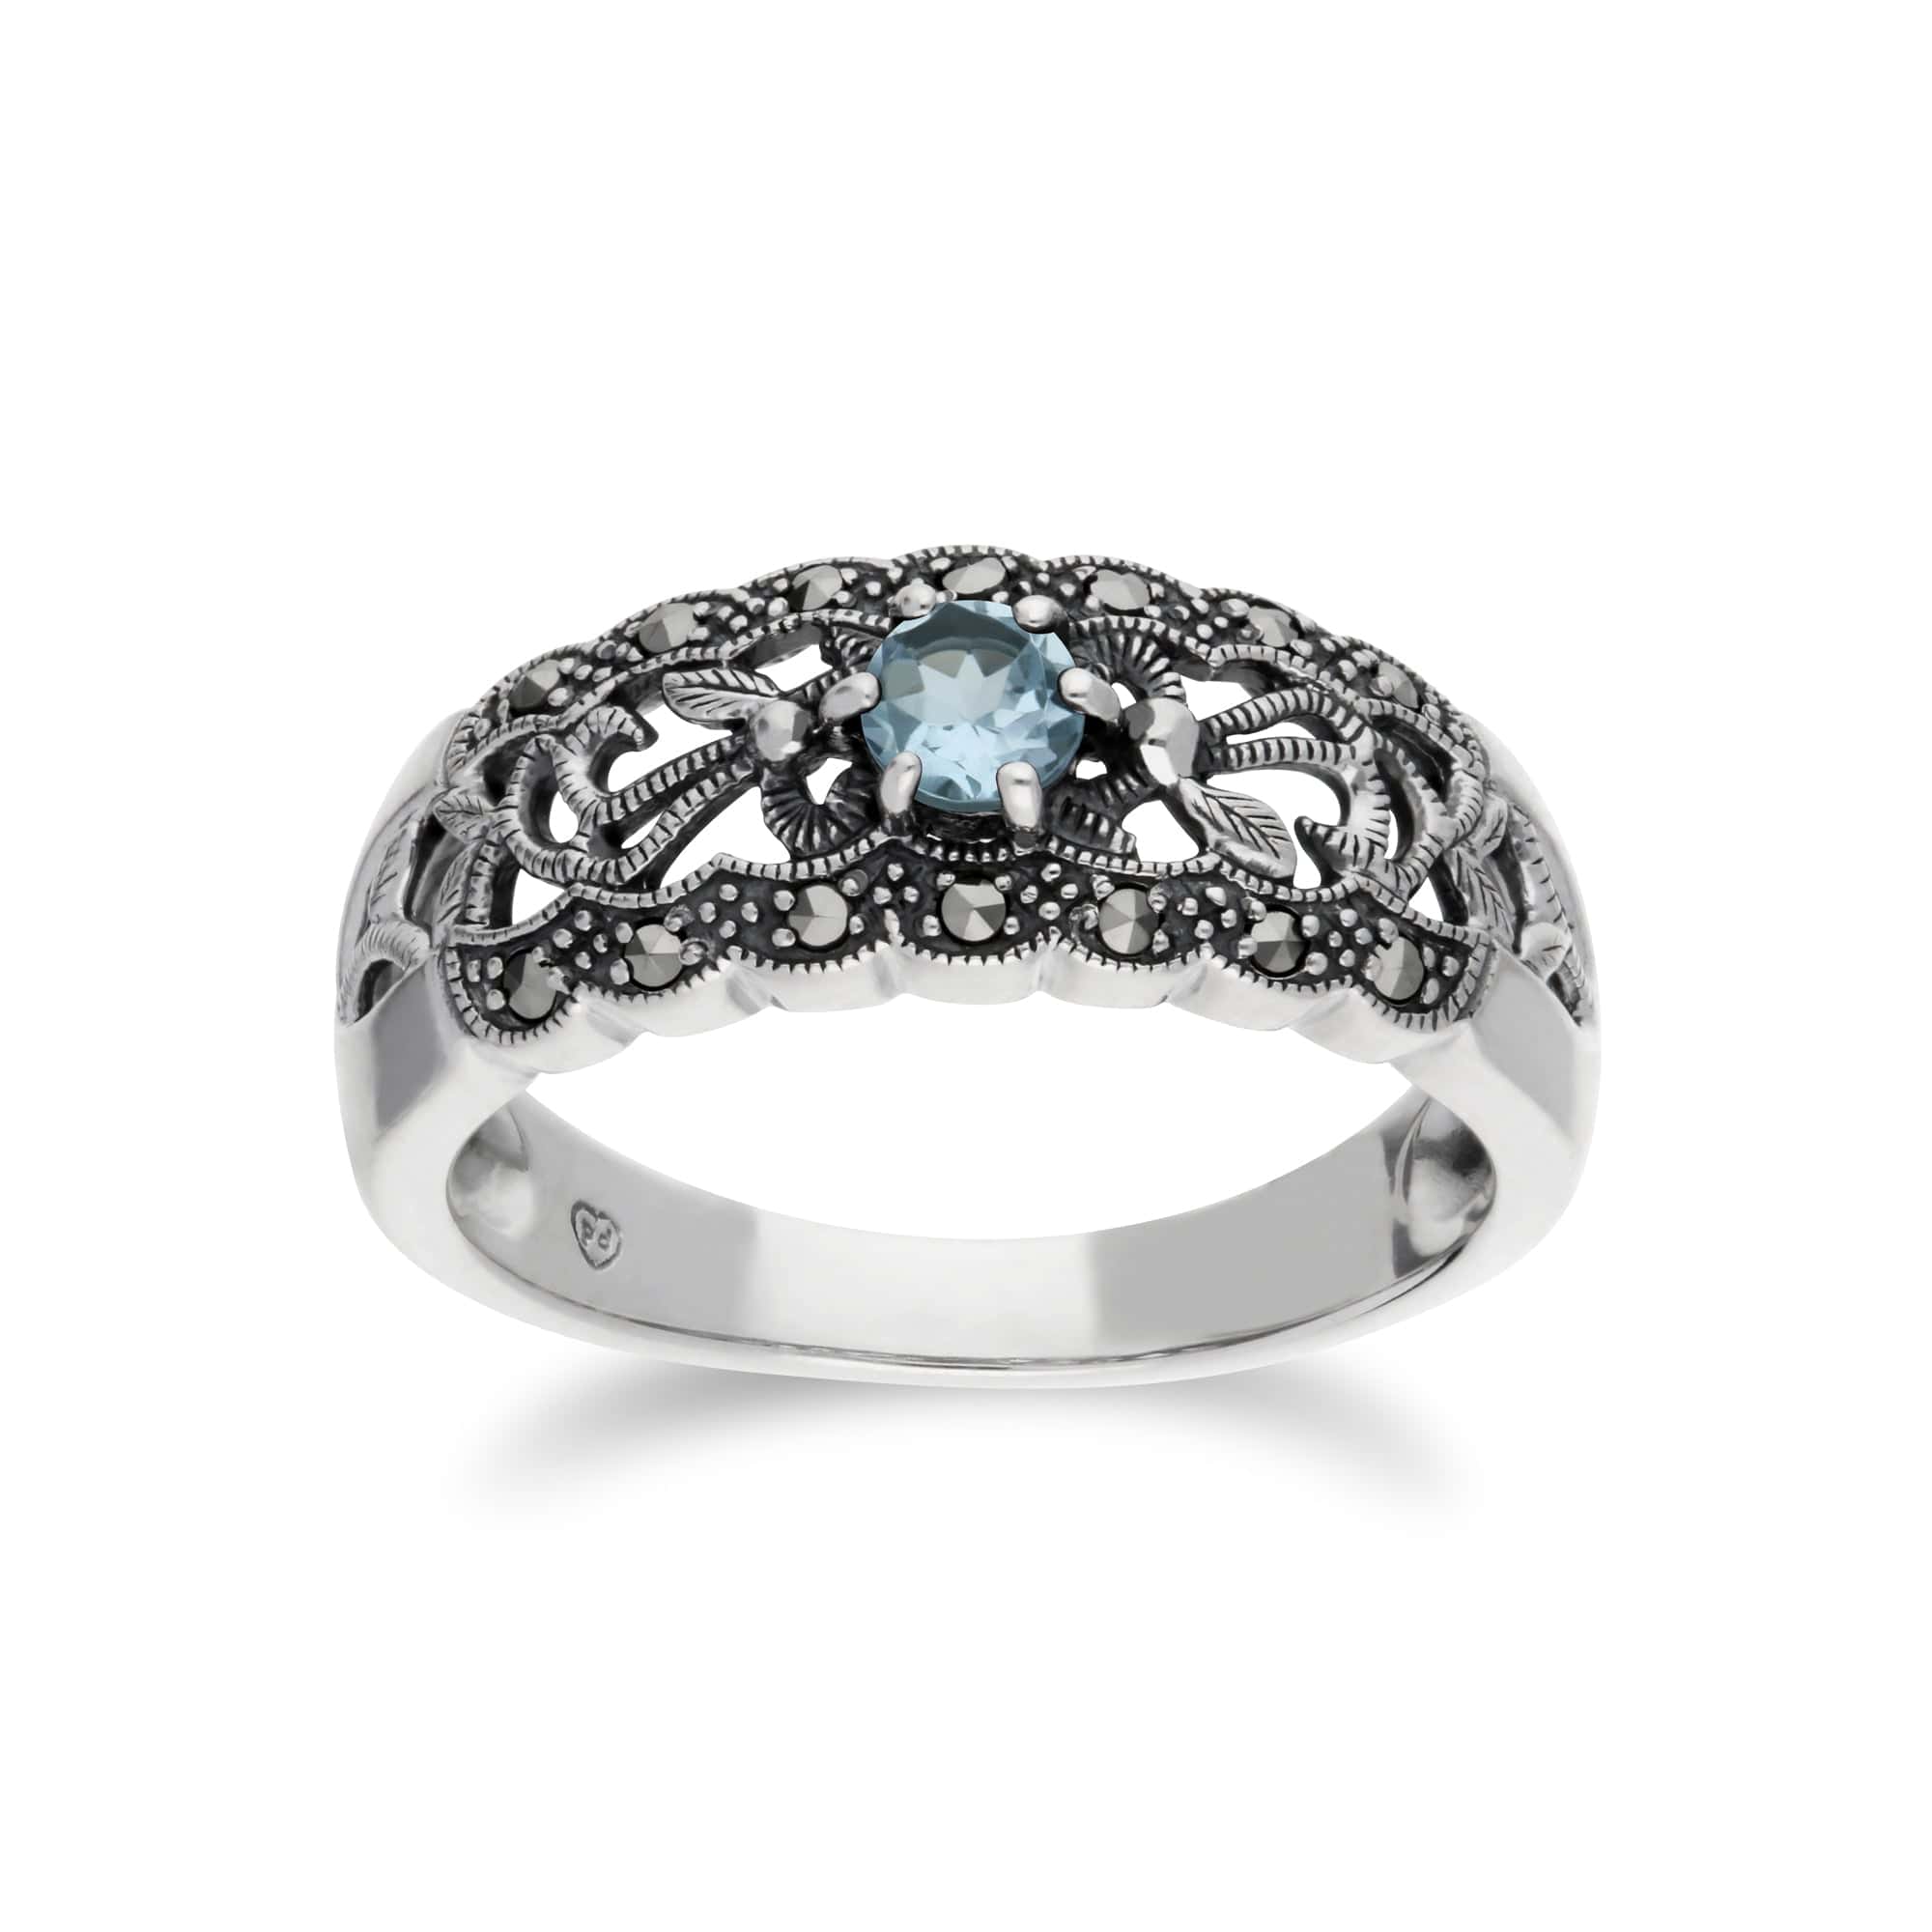 214R597702925 Art Nouveau Style Round Blue Topaz & Marcasite Floral Band Ring in Sterling Silver 1